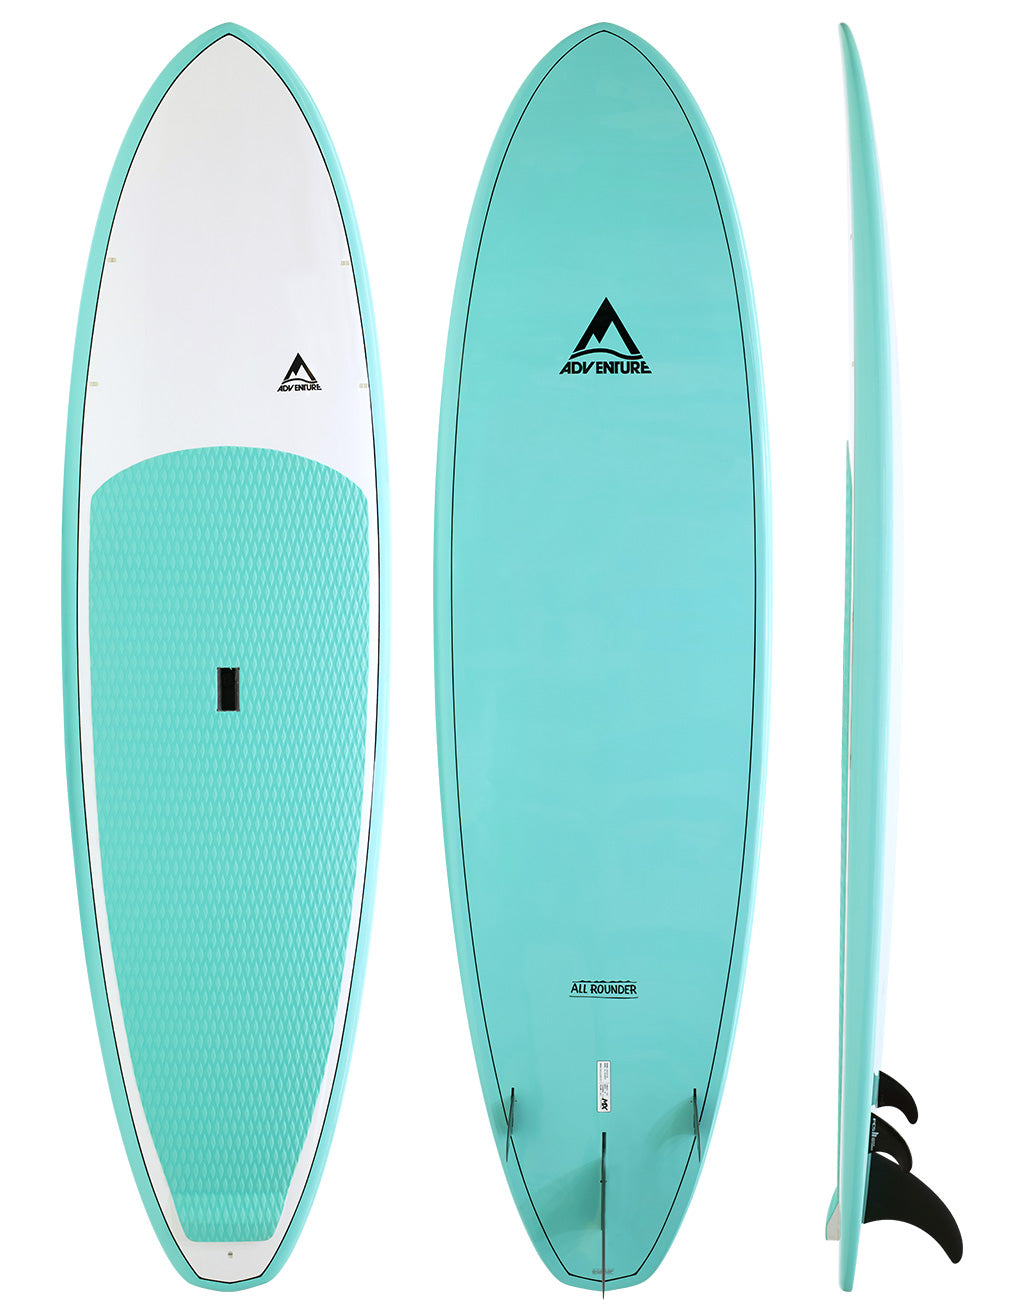 Adventure Paddleboarding All Rounder - green and white stand up paddleboard